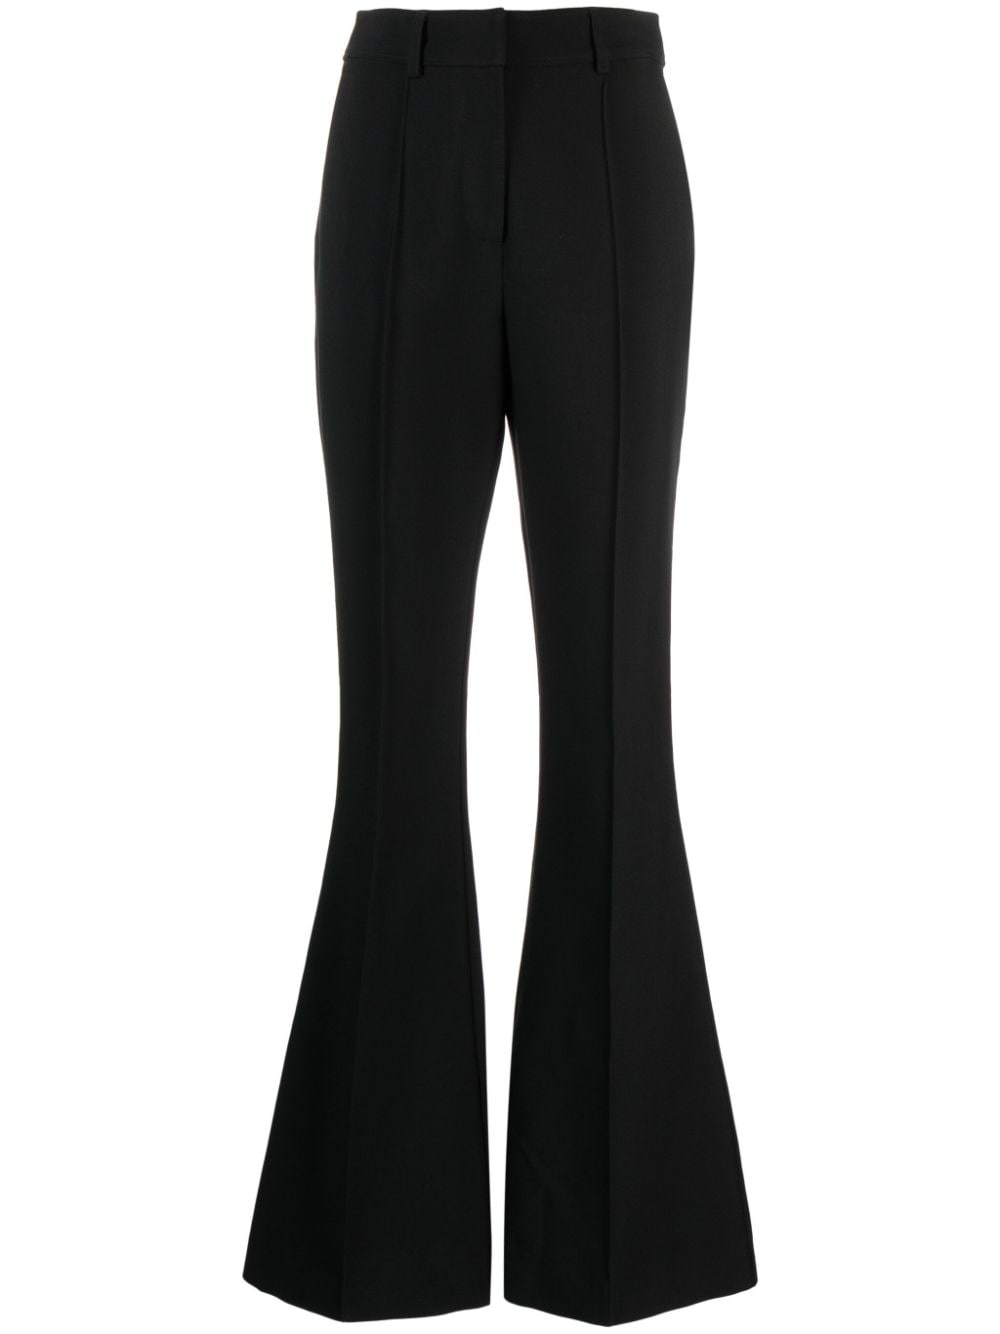 Acler Wirra flared trousers - Black von Acler